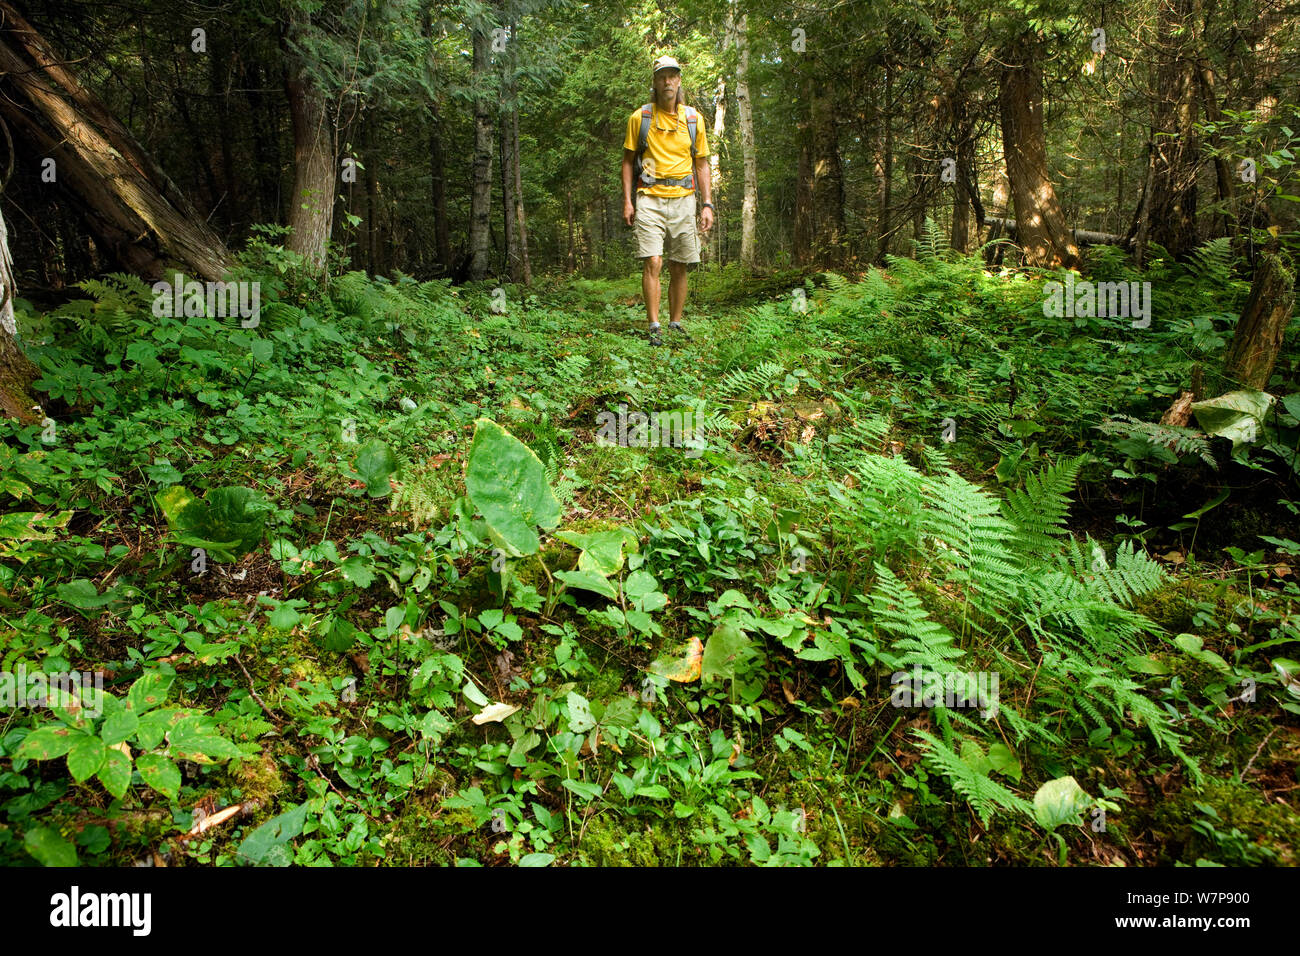 Hiker on the Kab-Ash Trail in Voyageurs National Park. Minnesota, USA, August 2011 Model released Stock Photo